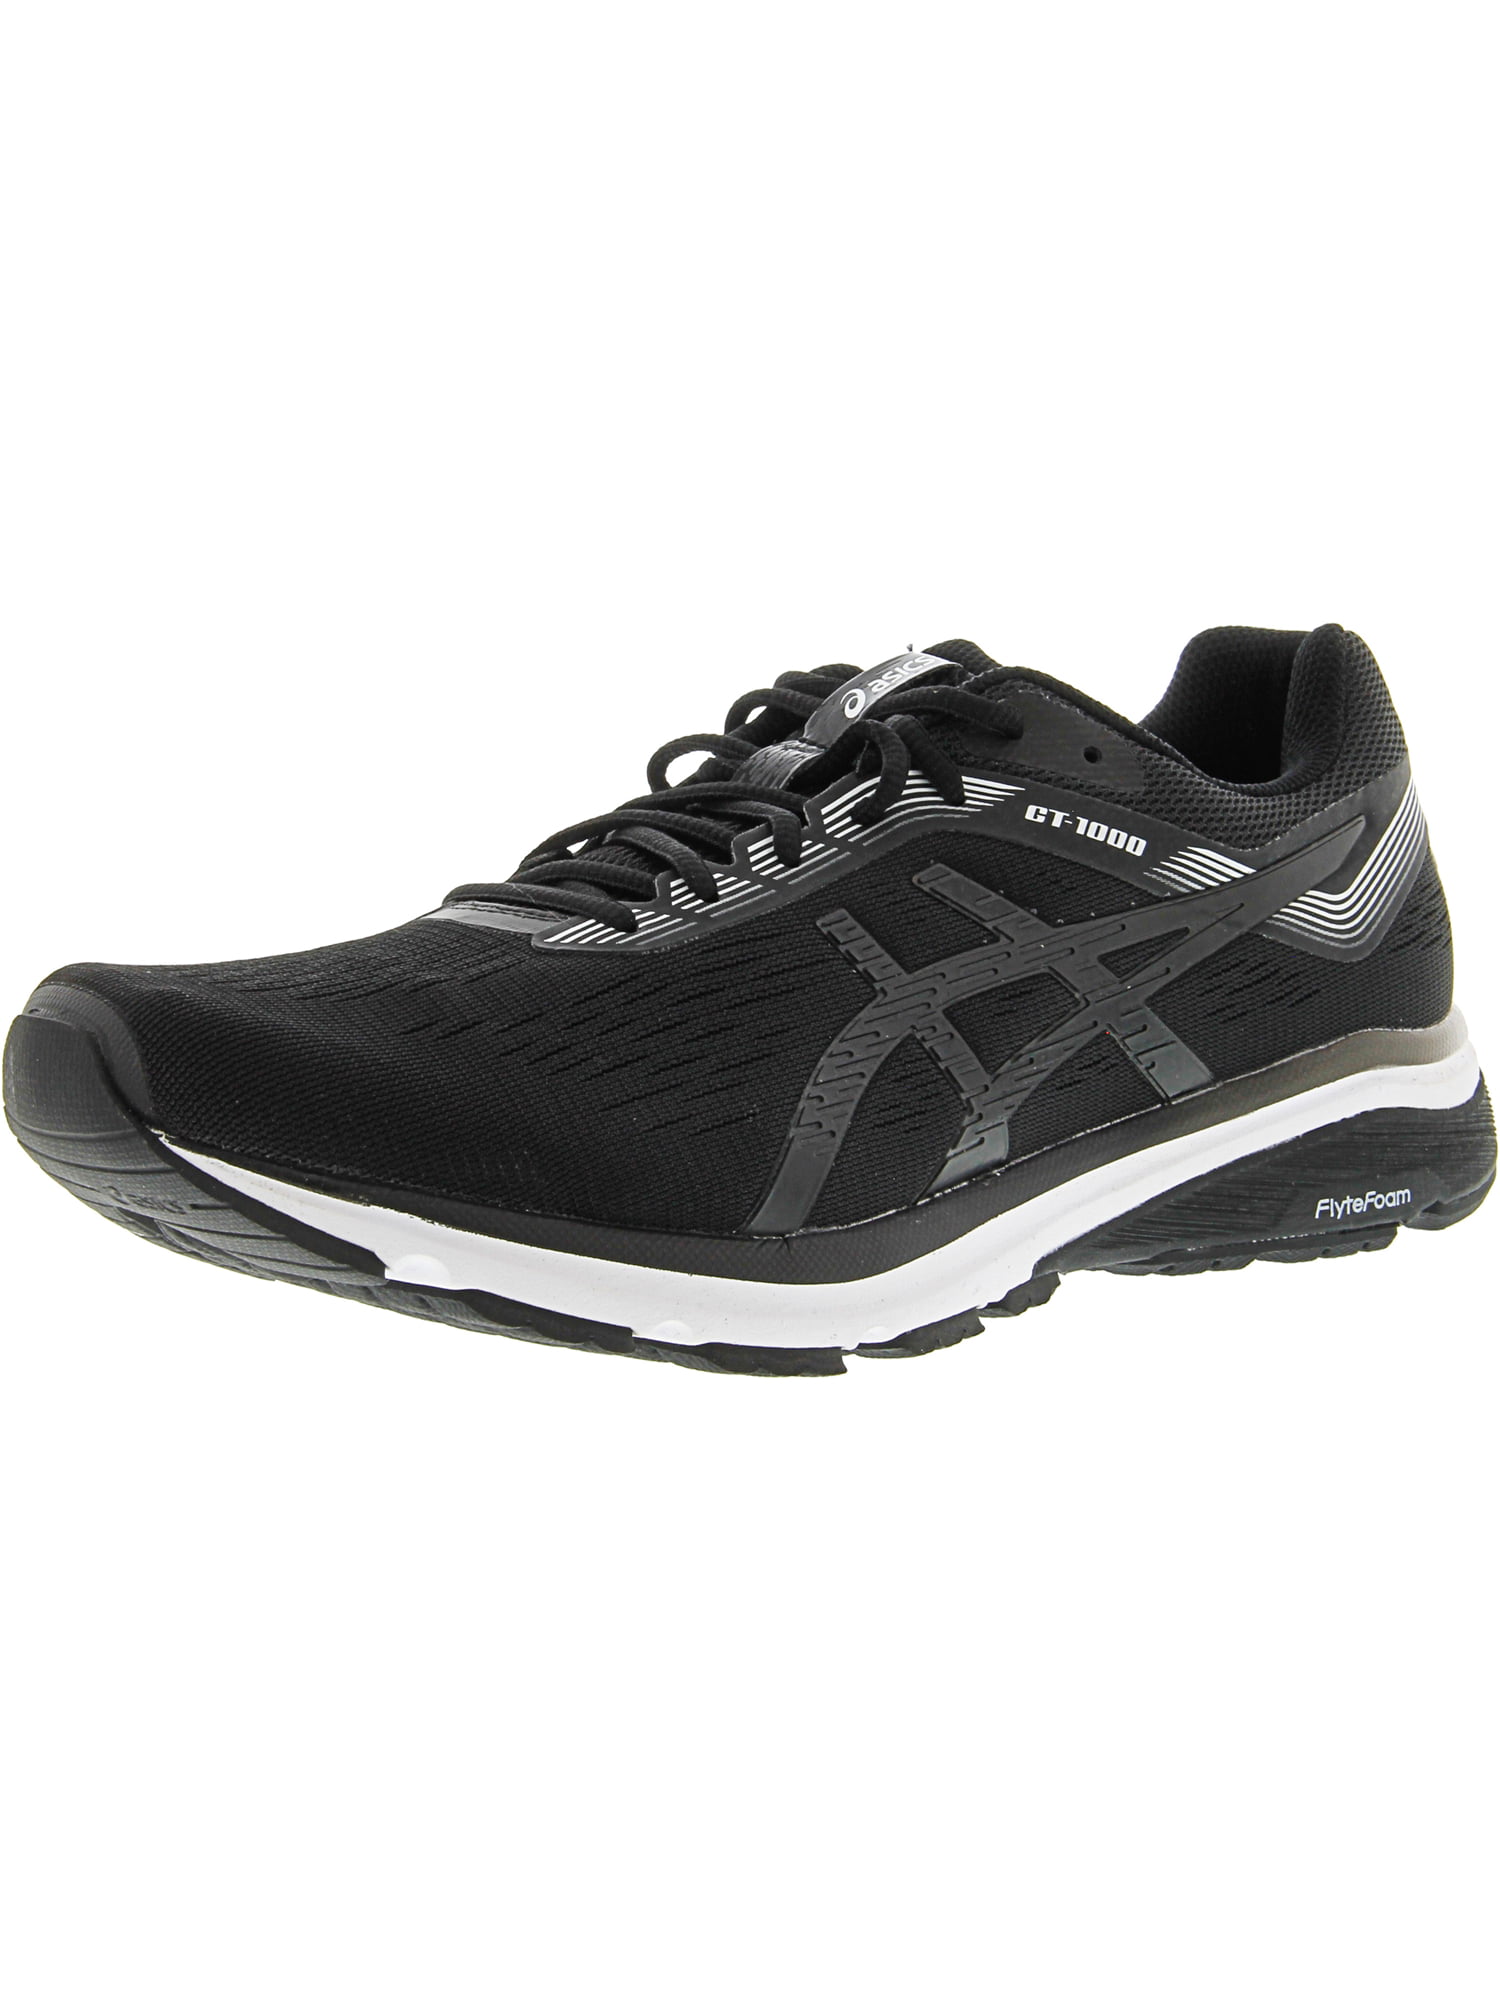 asics mens running shoes size 10.5